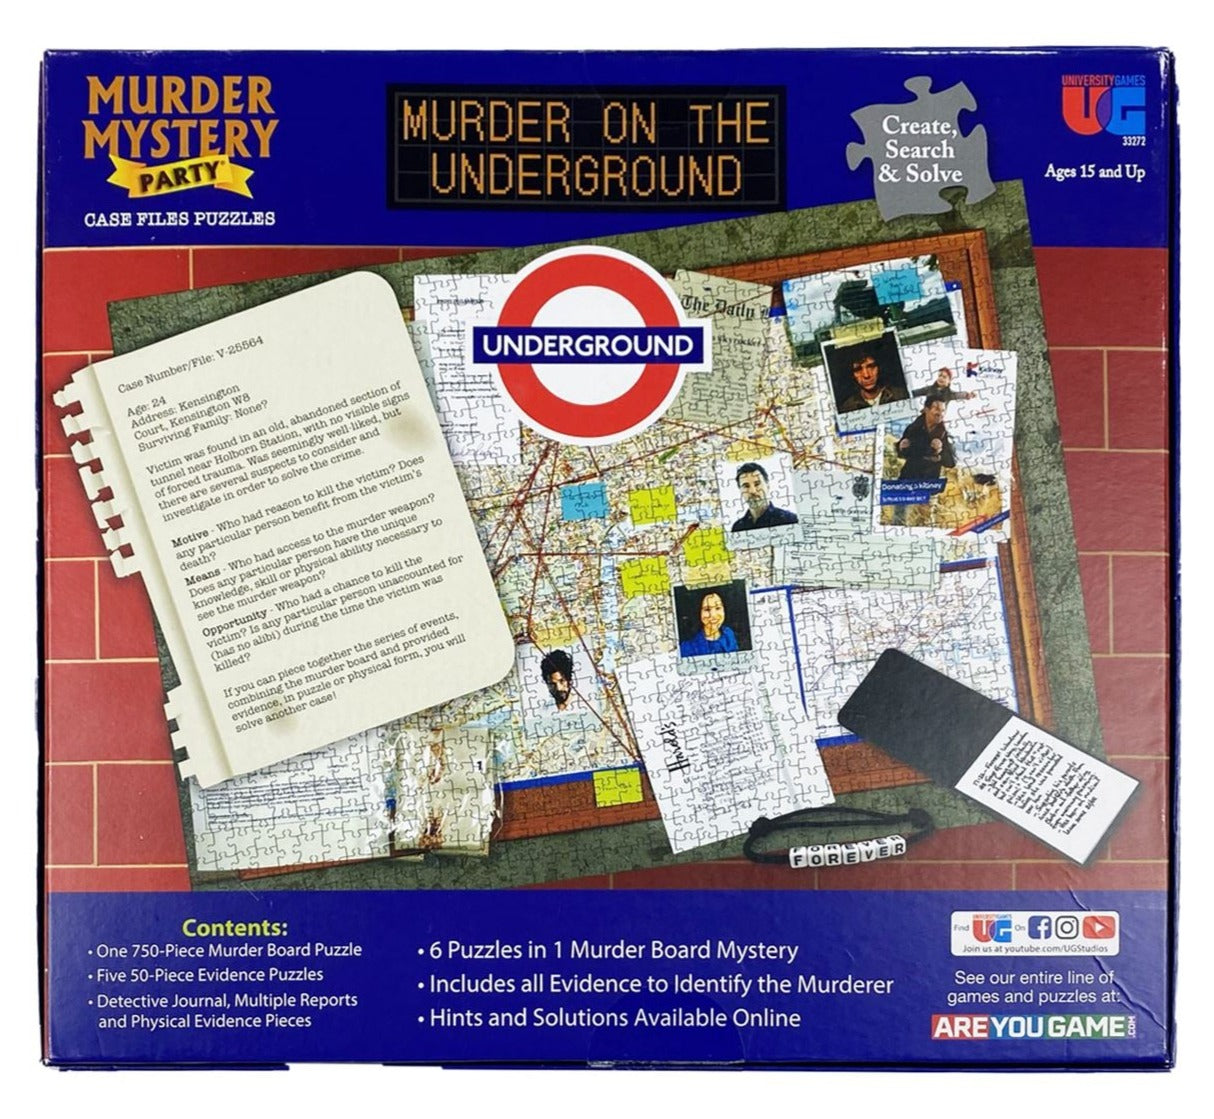 Murder on the Underground Jigsaw Puzzle Board Mystery box back